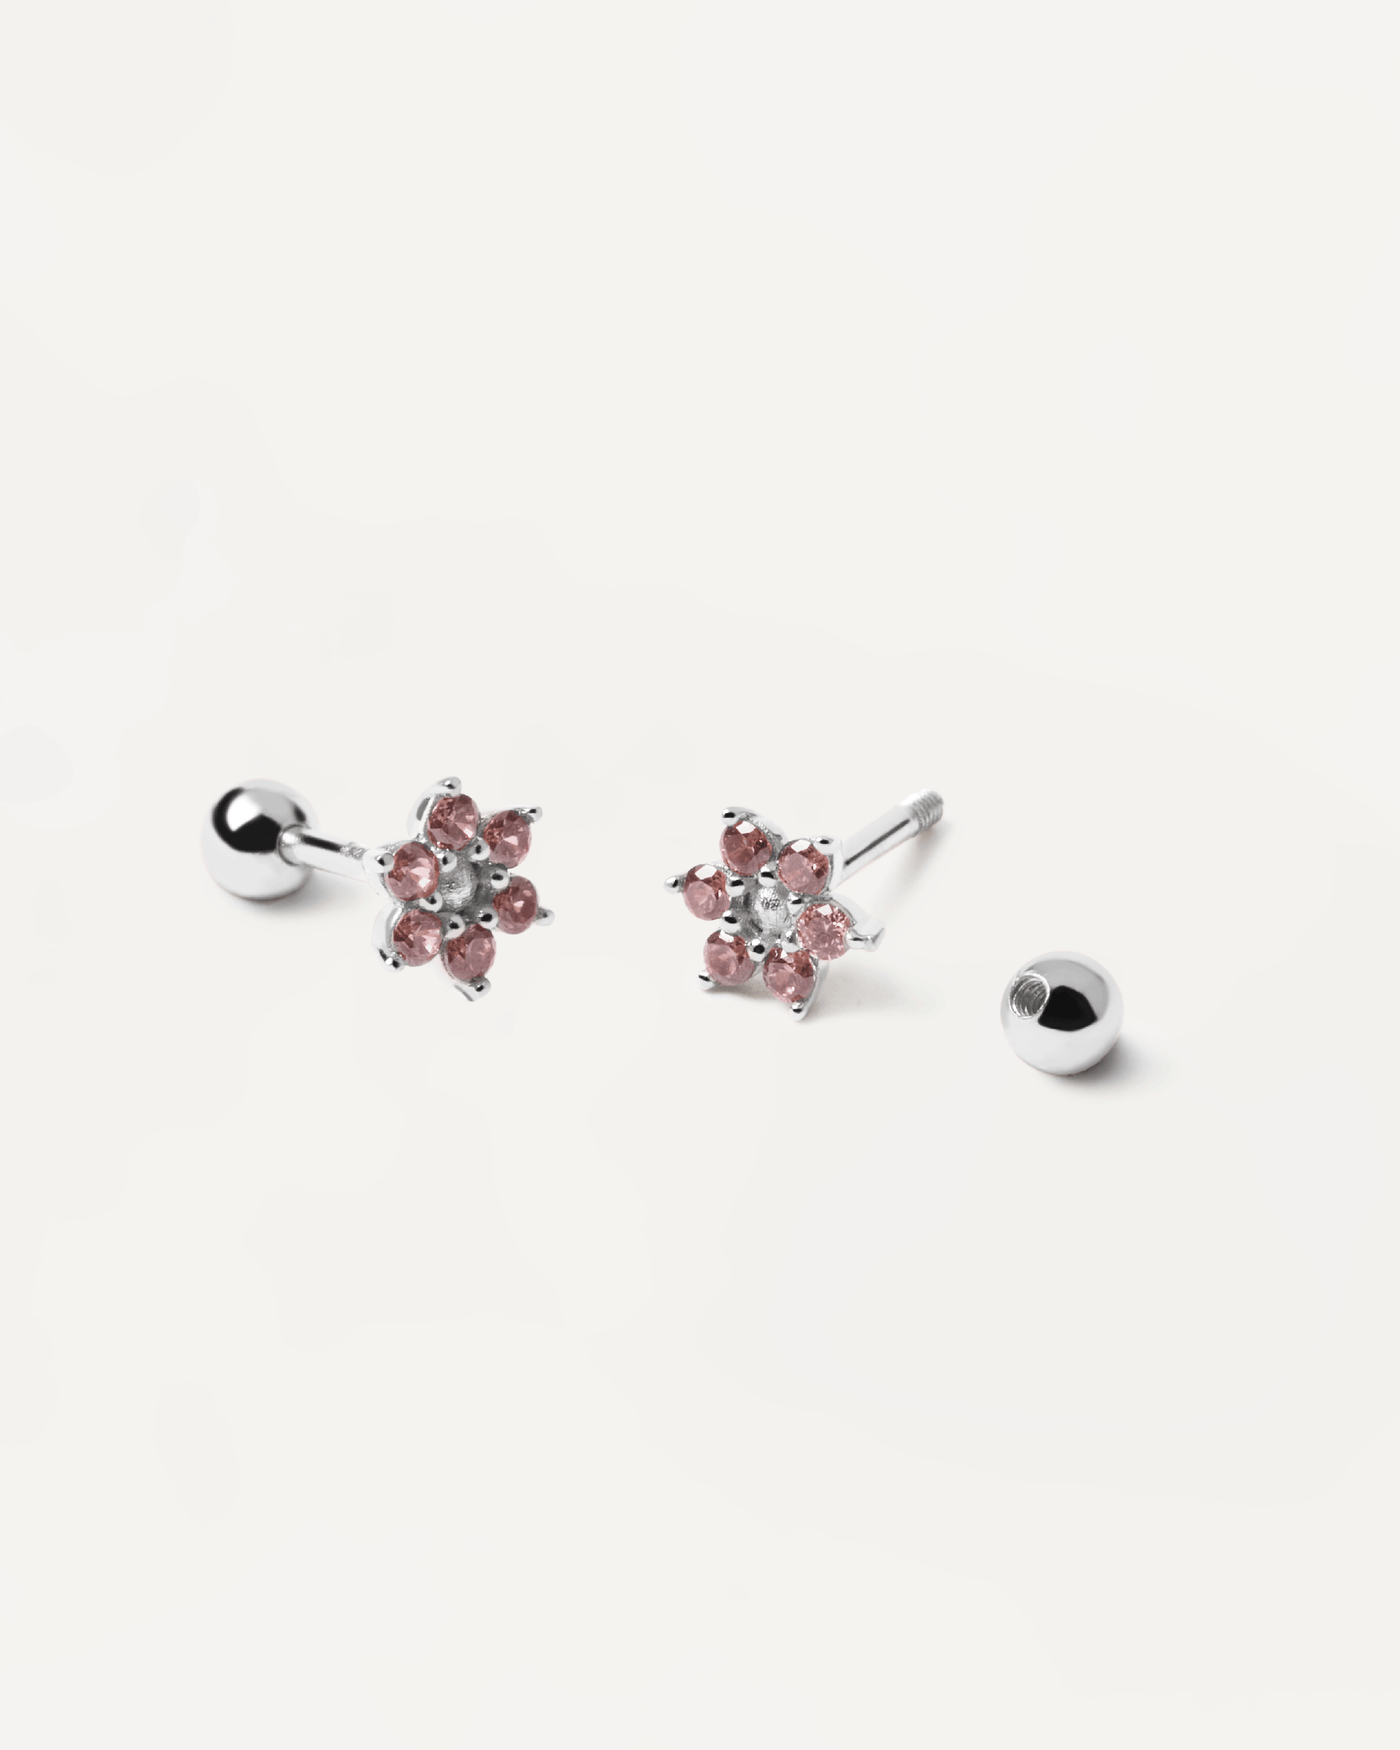 2023 Selection | Rose Peony Silver Earrings. Get the latest arrival from PDPAOLA. Place your order safely and get this Best Seller. Free Shipping over 40€